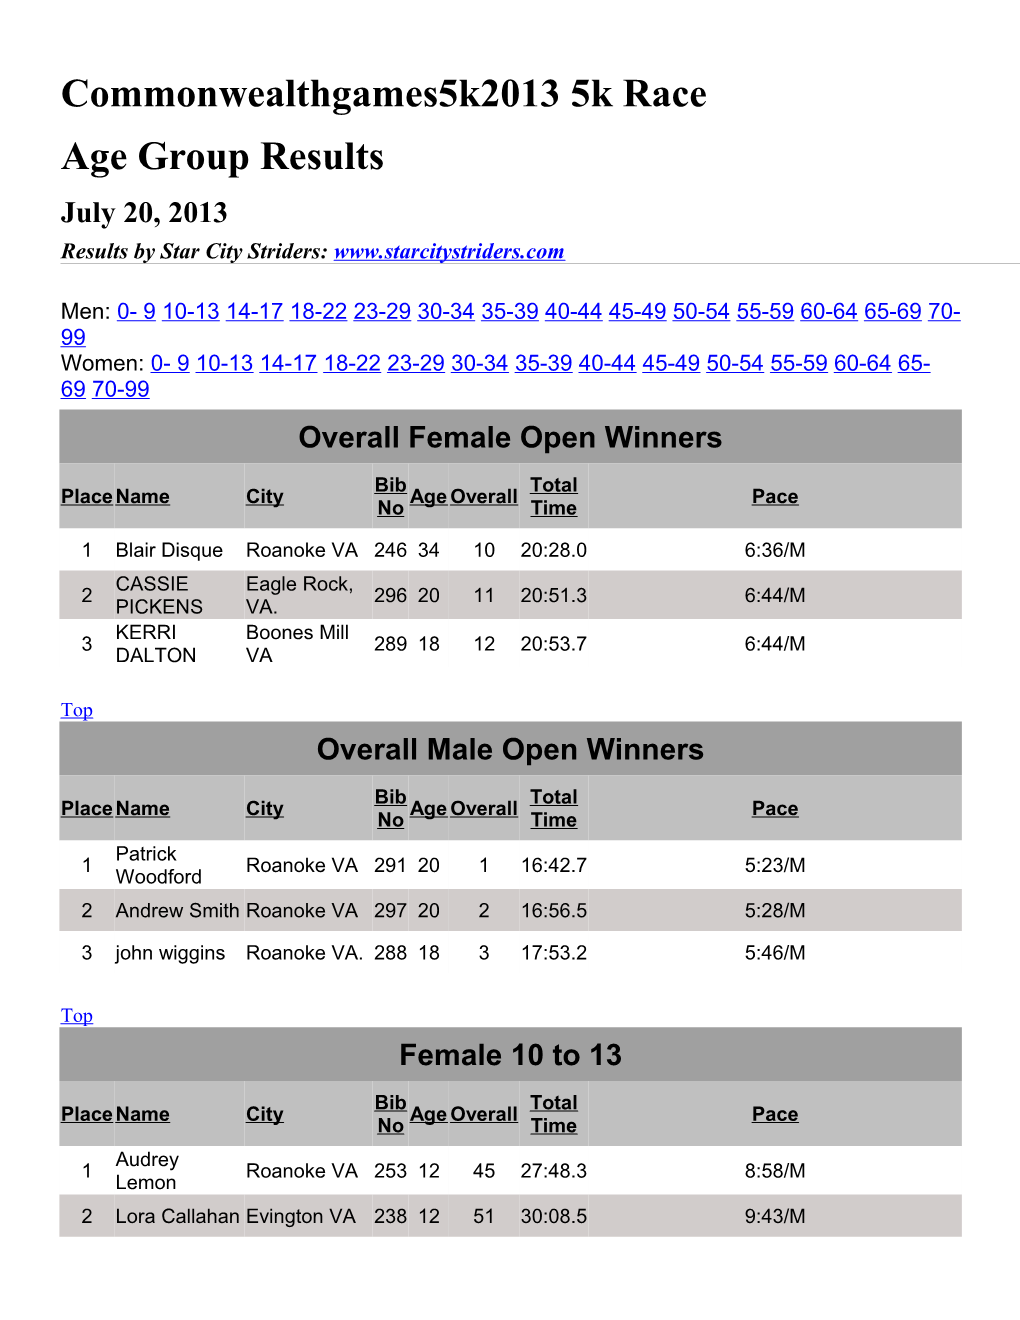 Results by Star City Striders